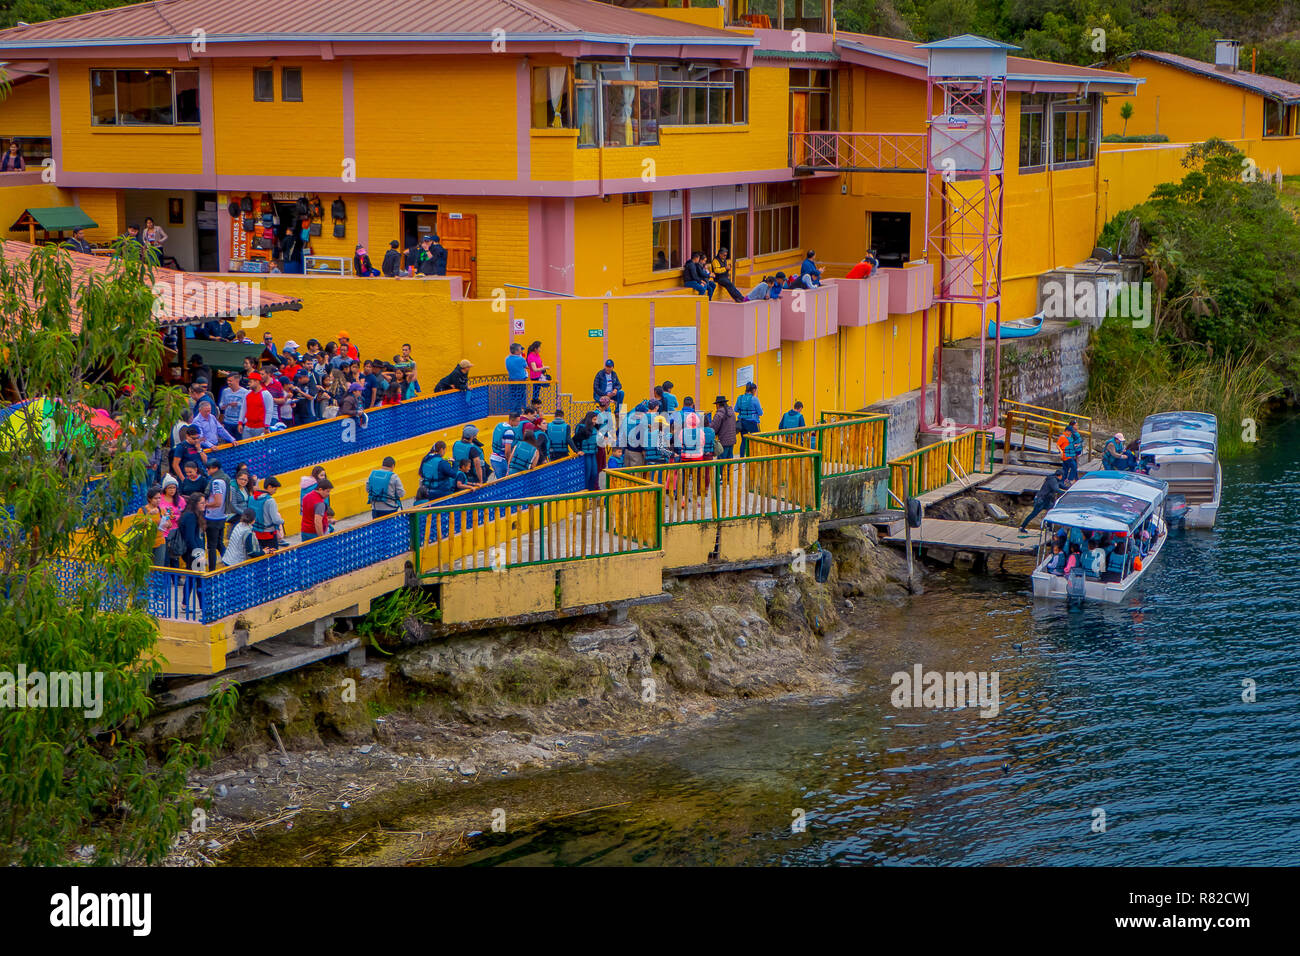 CUICOCHA, ECUADOR, NOVEMBER 06, 2018: Above view of yellow information building with some tourists boarding a boat to have a tour in the Cuicocha lake in Ecuador Stock Photo